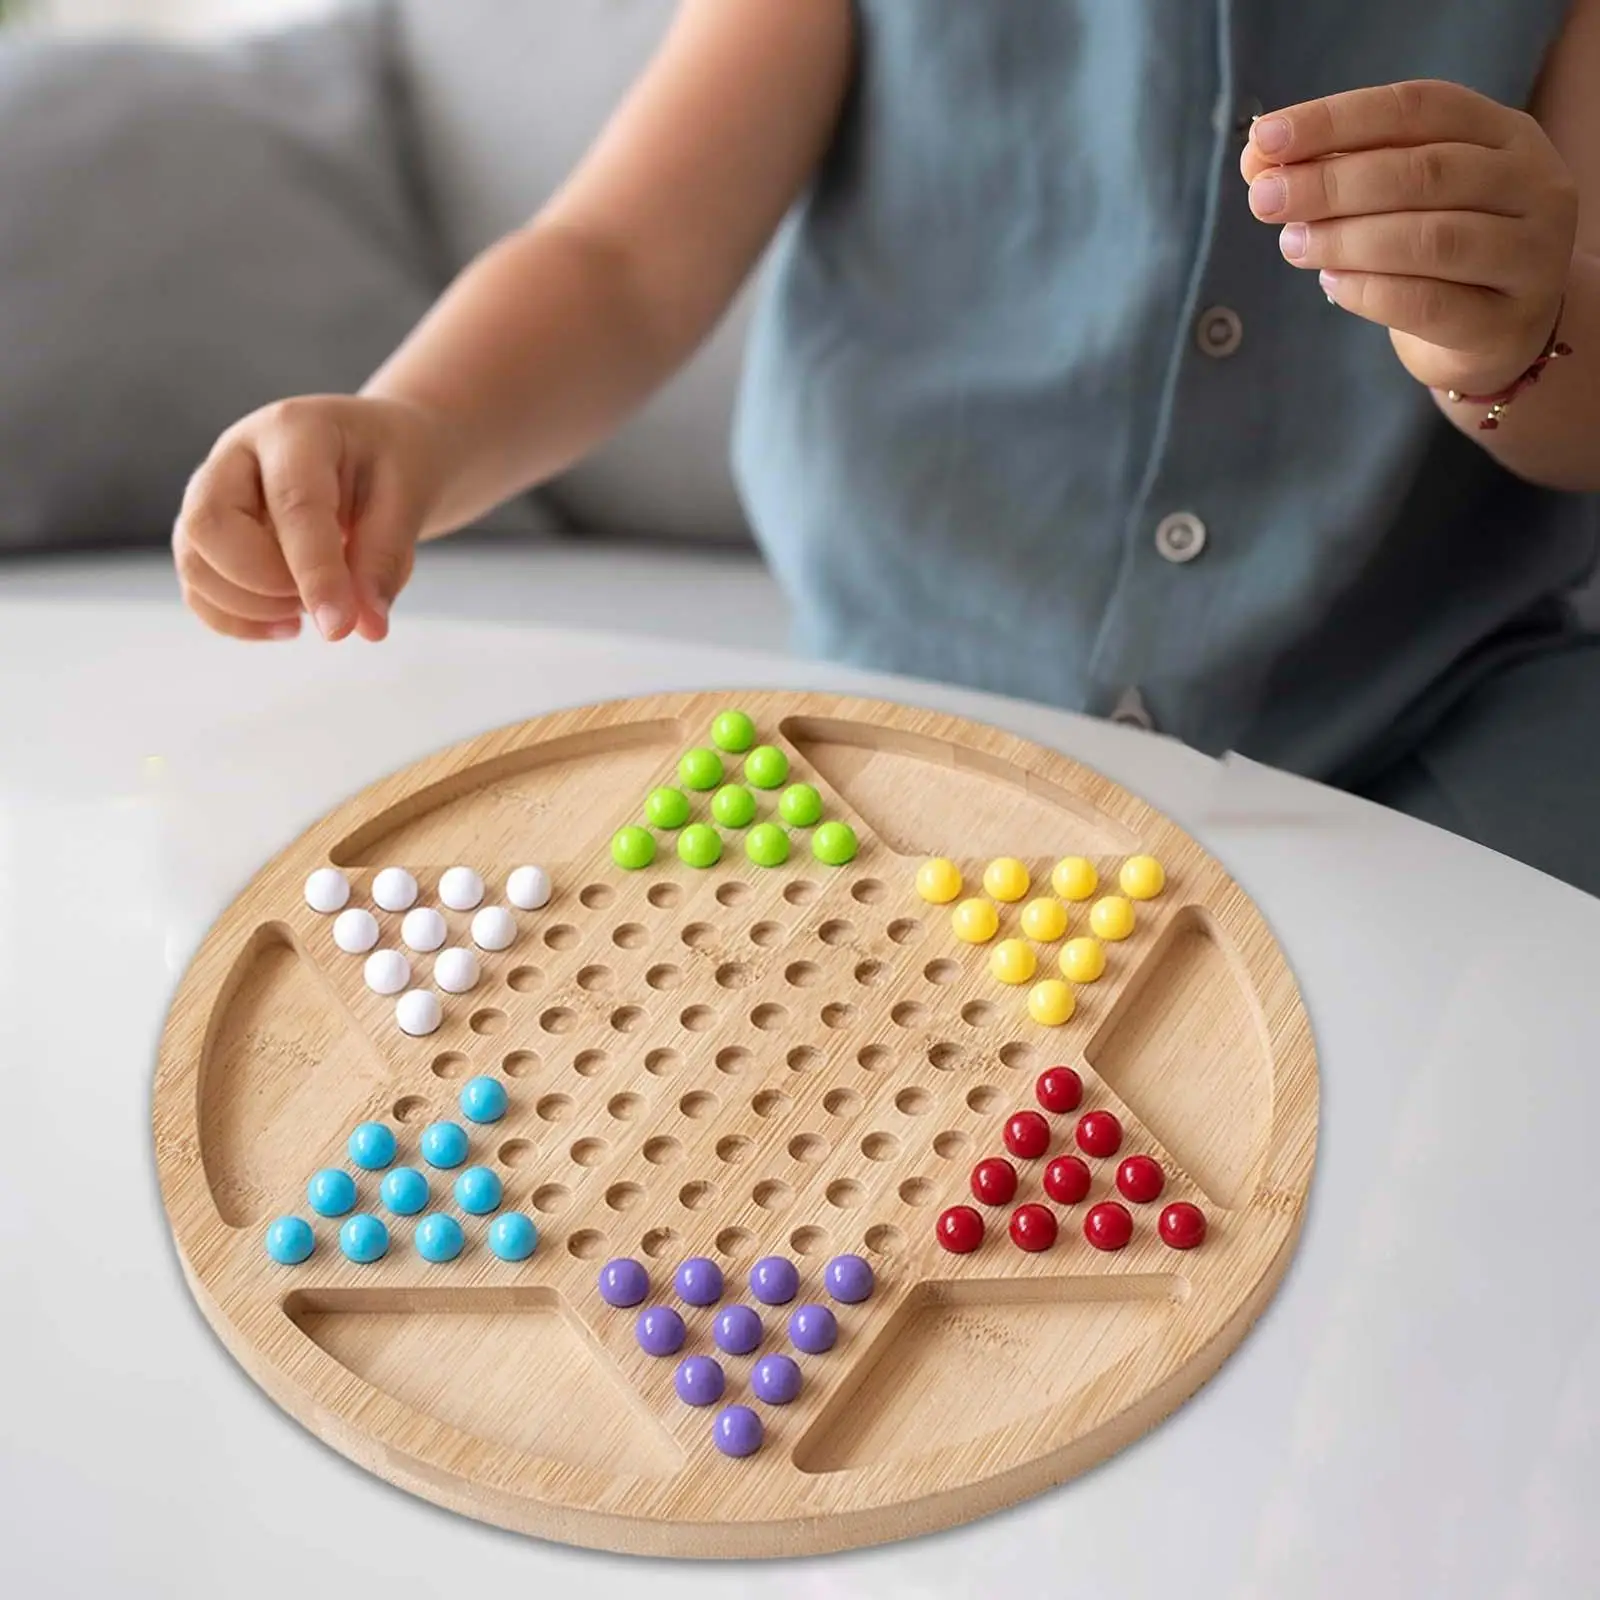 Chinese Checkers Classic Strategy Game Easy Grasping 29cm with 60 Marbles Family Board Game for Seniors Family Gathering Adults